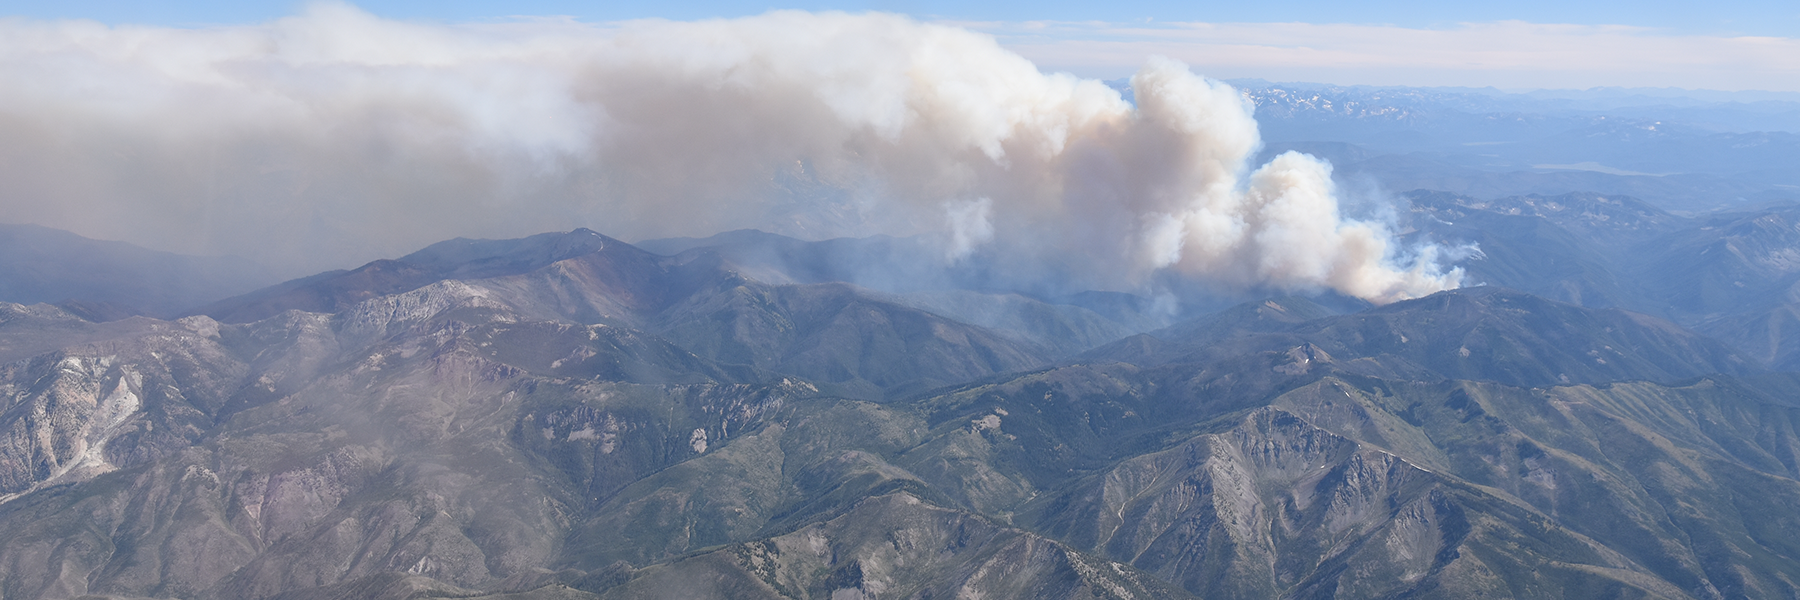 Wildfire smoke over mountains, link to article